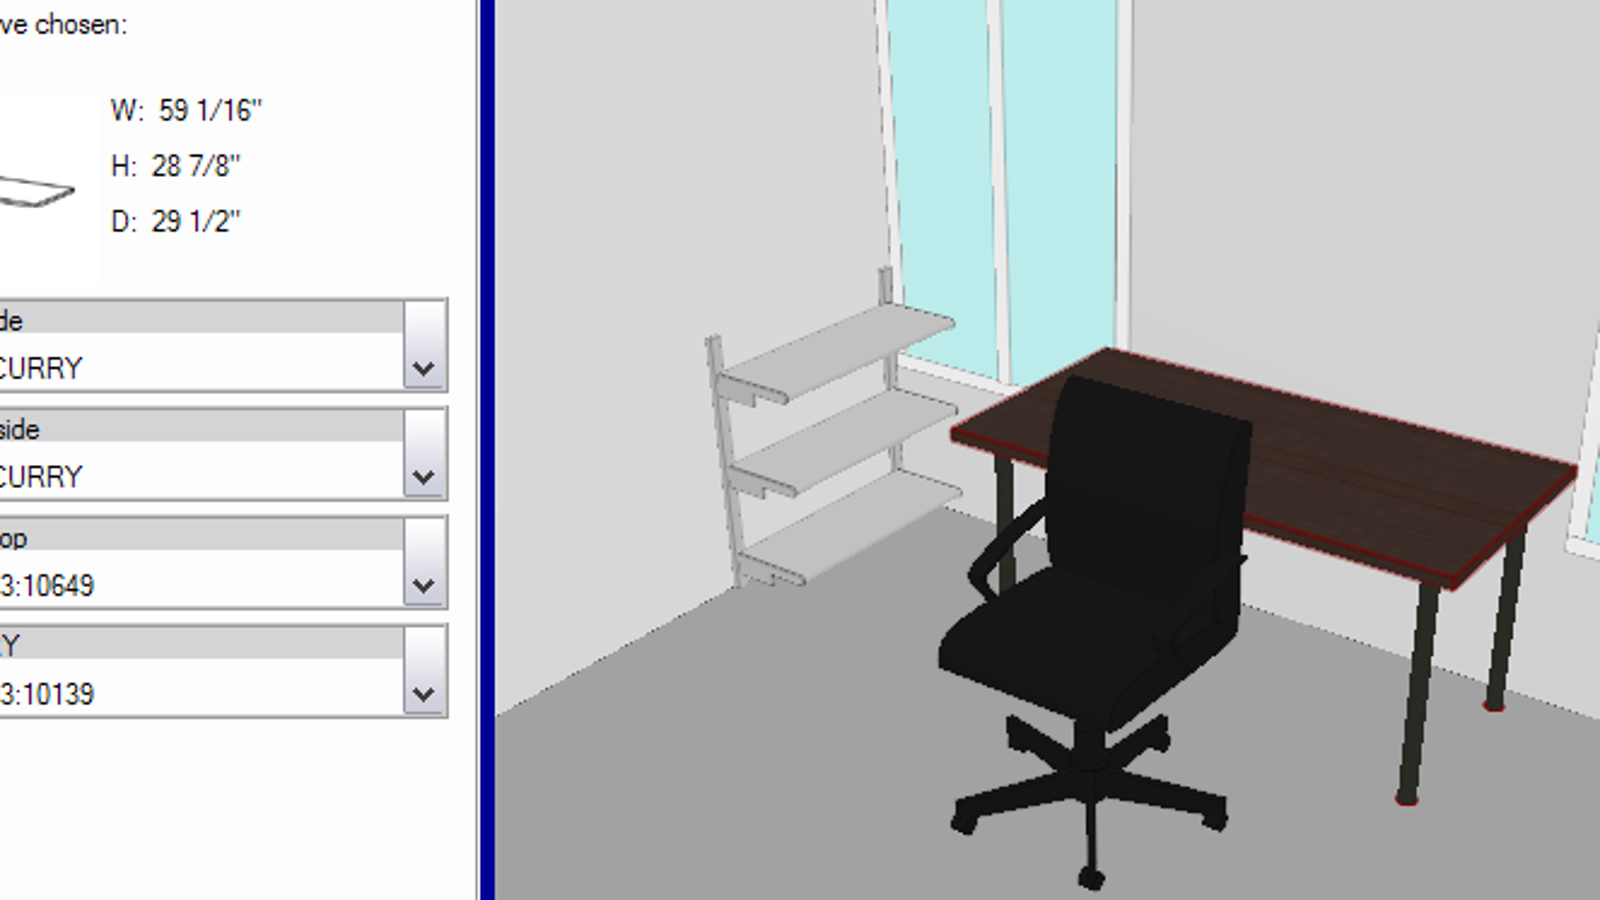 ikea 3d planner plan tool rooms dream visualizes lined kitchen lifehacker visualises